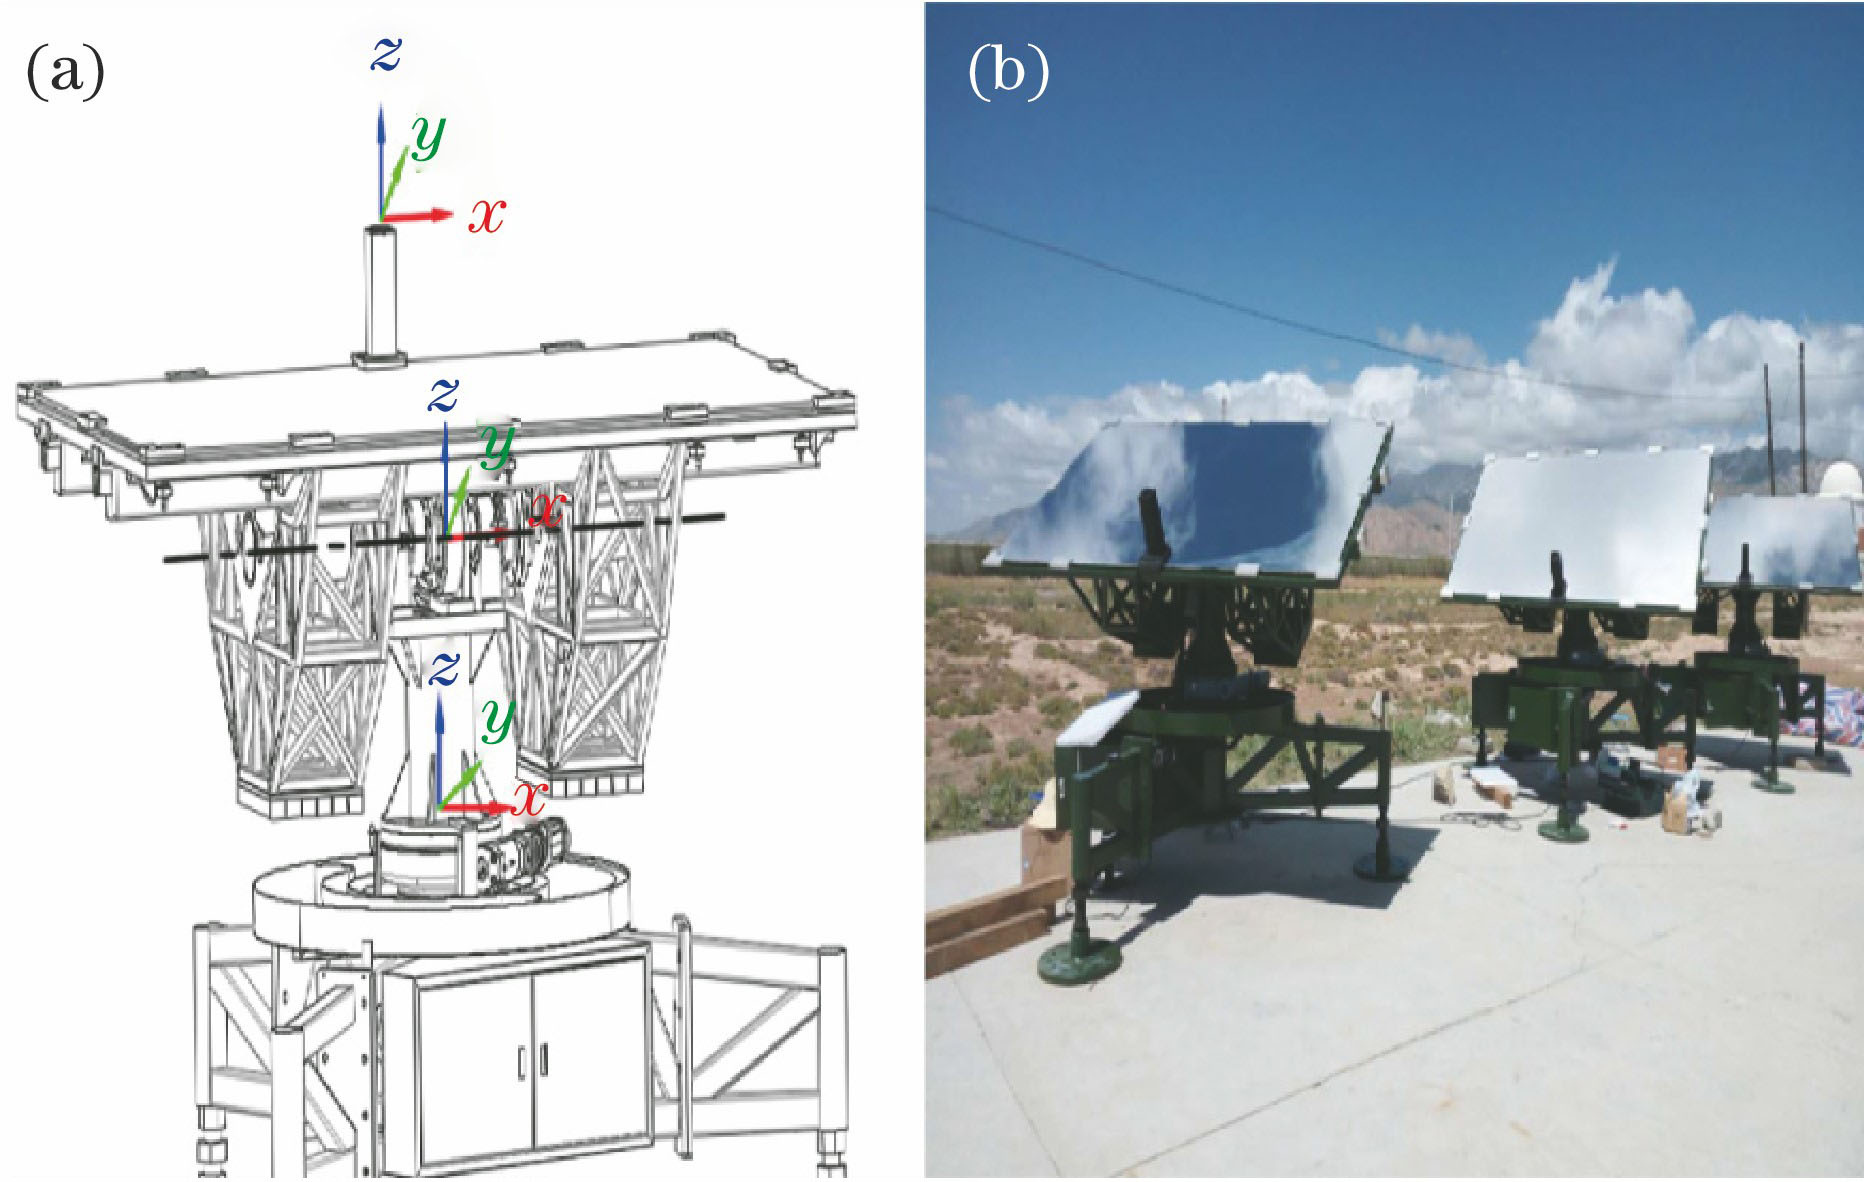 High-precision point light source system. (a) Structural diagram; (b) physical map